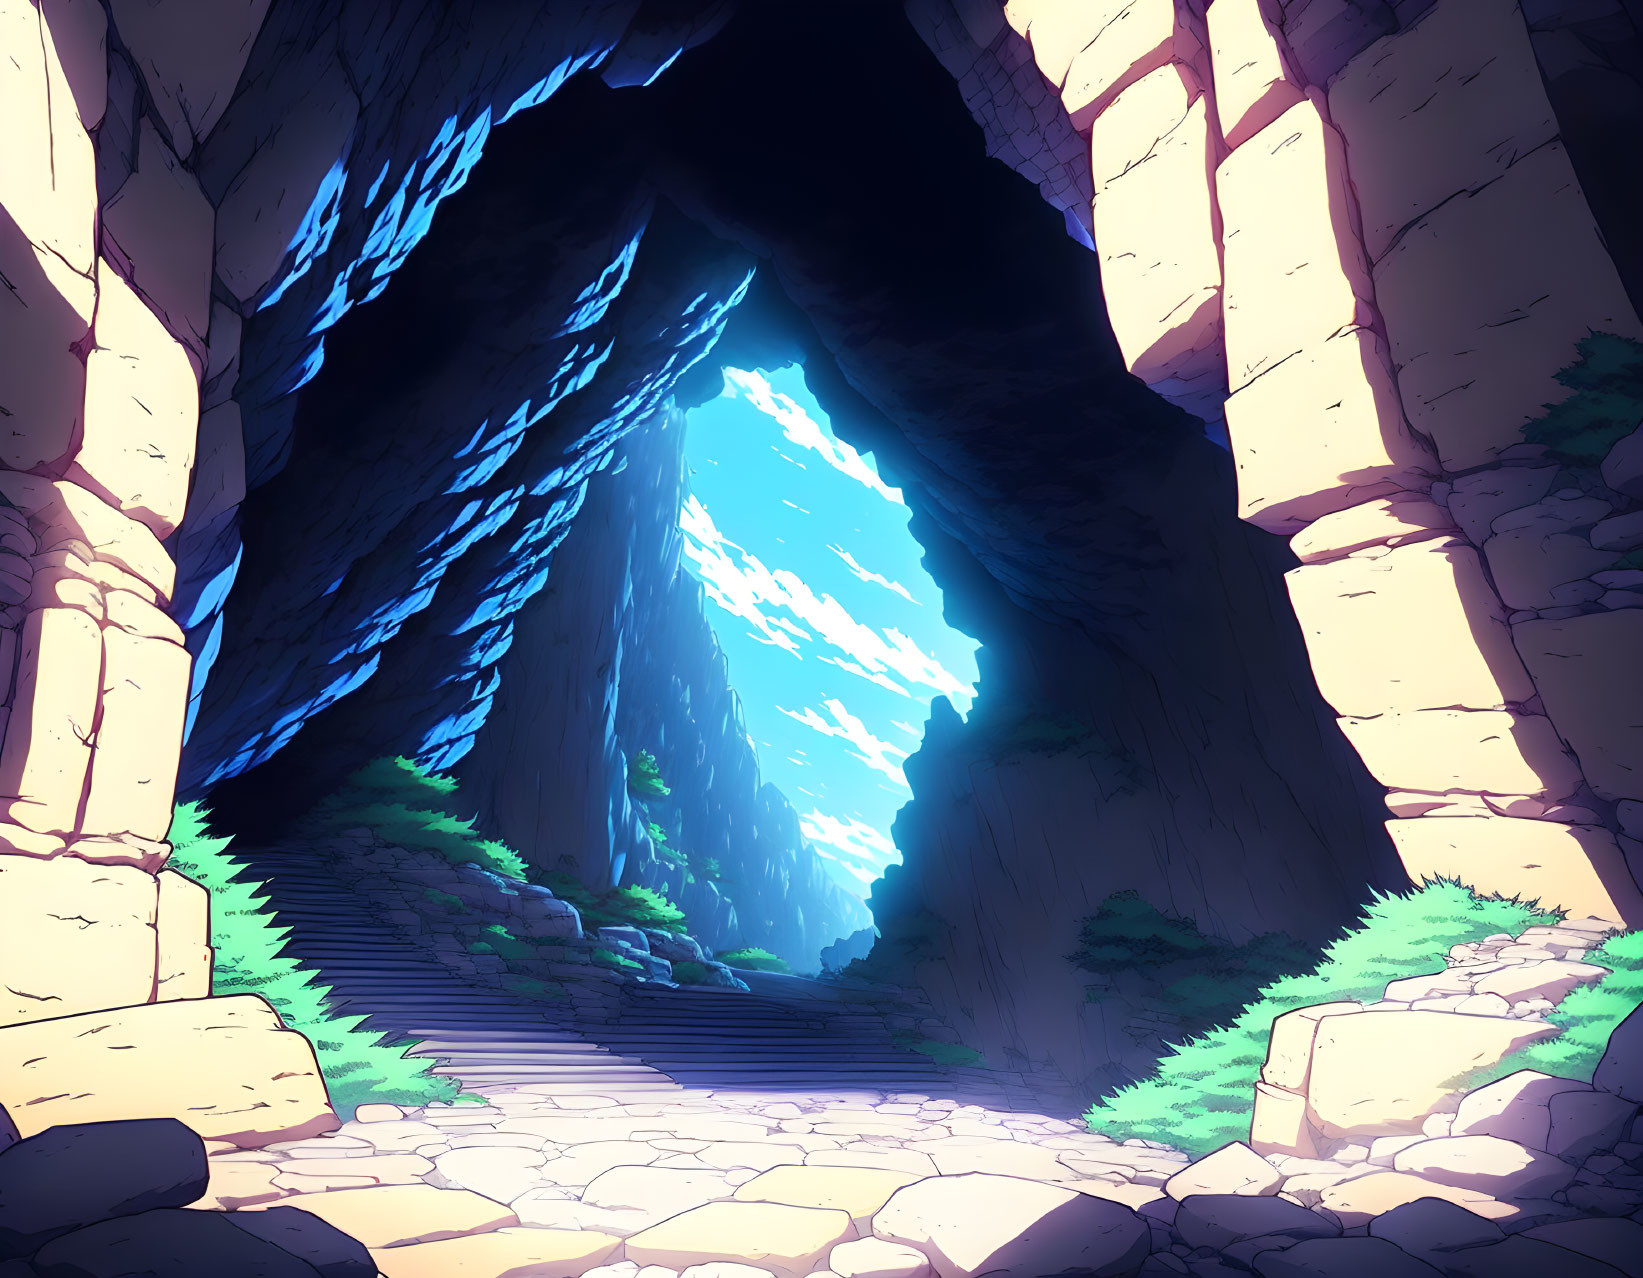 Cave exit in anime style